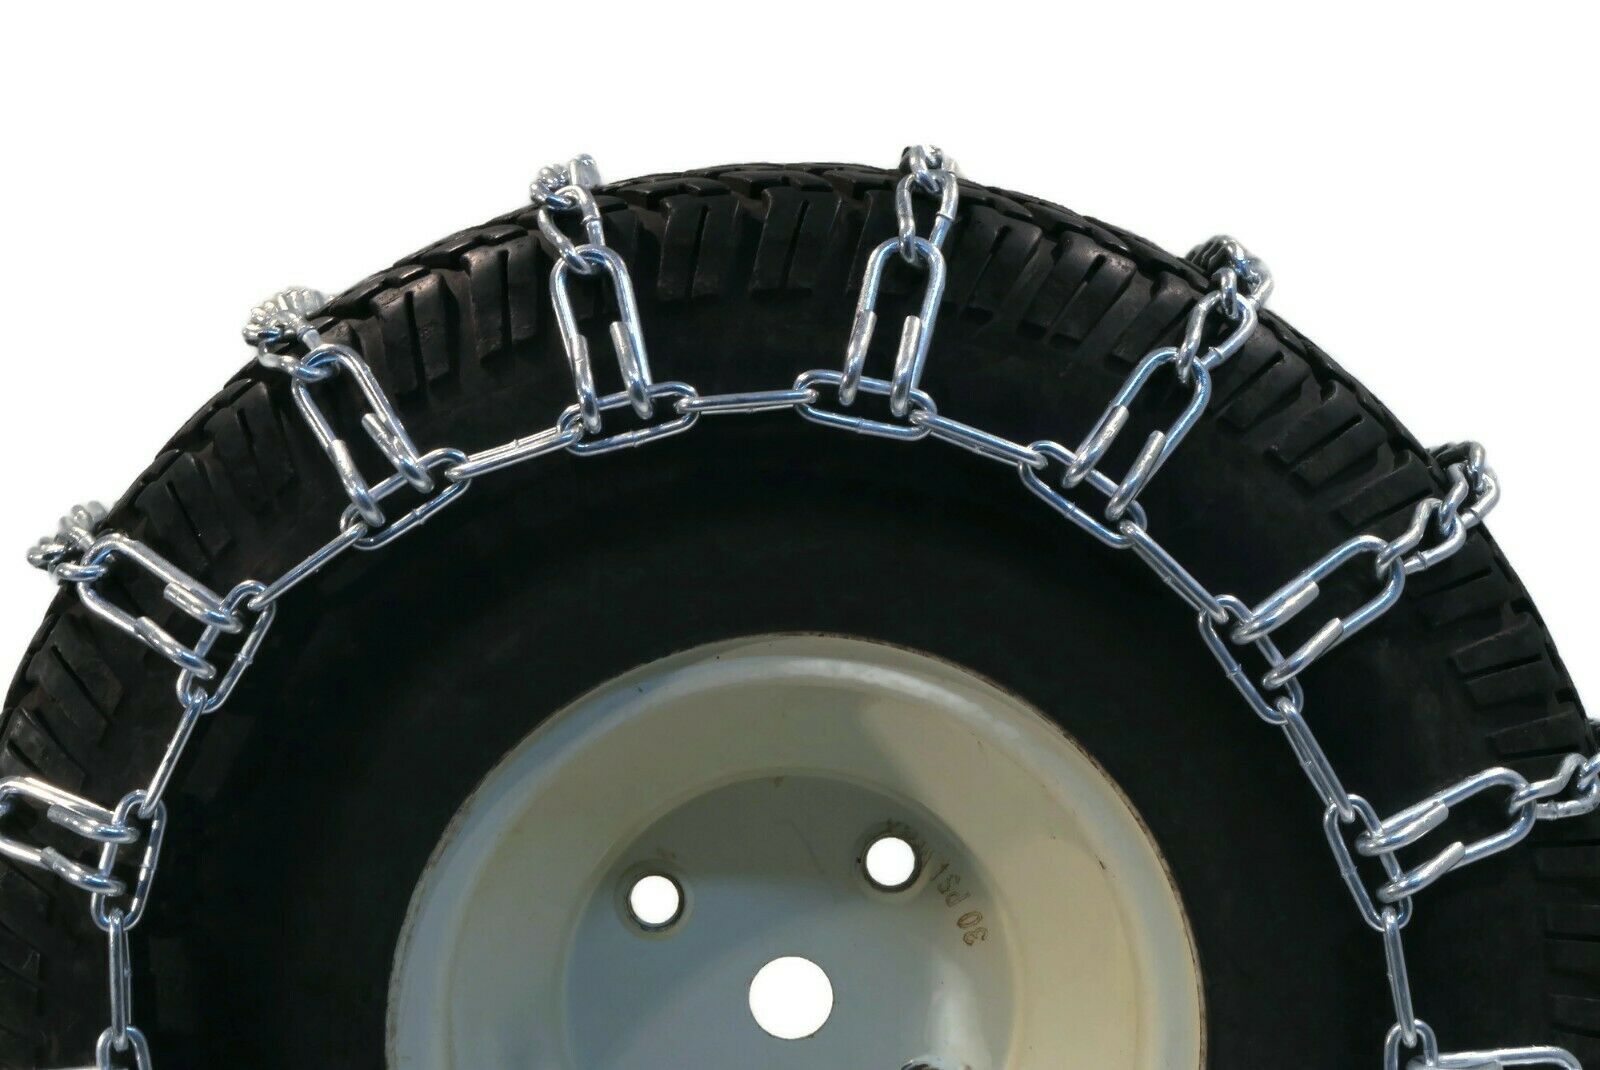 PAIR 2 Link TIRE CHAINS 26x12-12 for Simplicty Lawn Mower Garden Tractor Rider by The ROP Shop - image 4 of 6